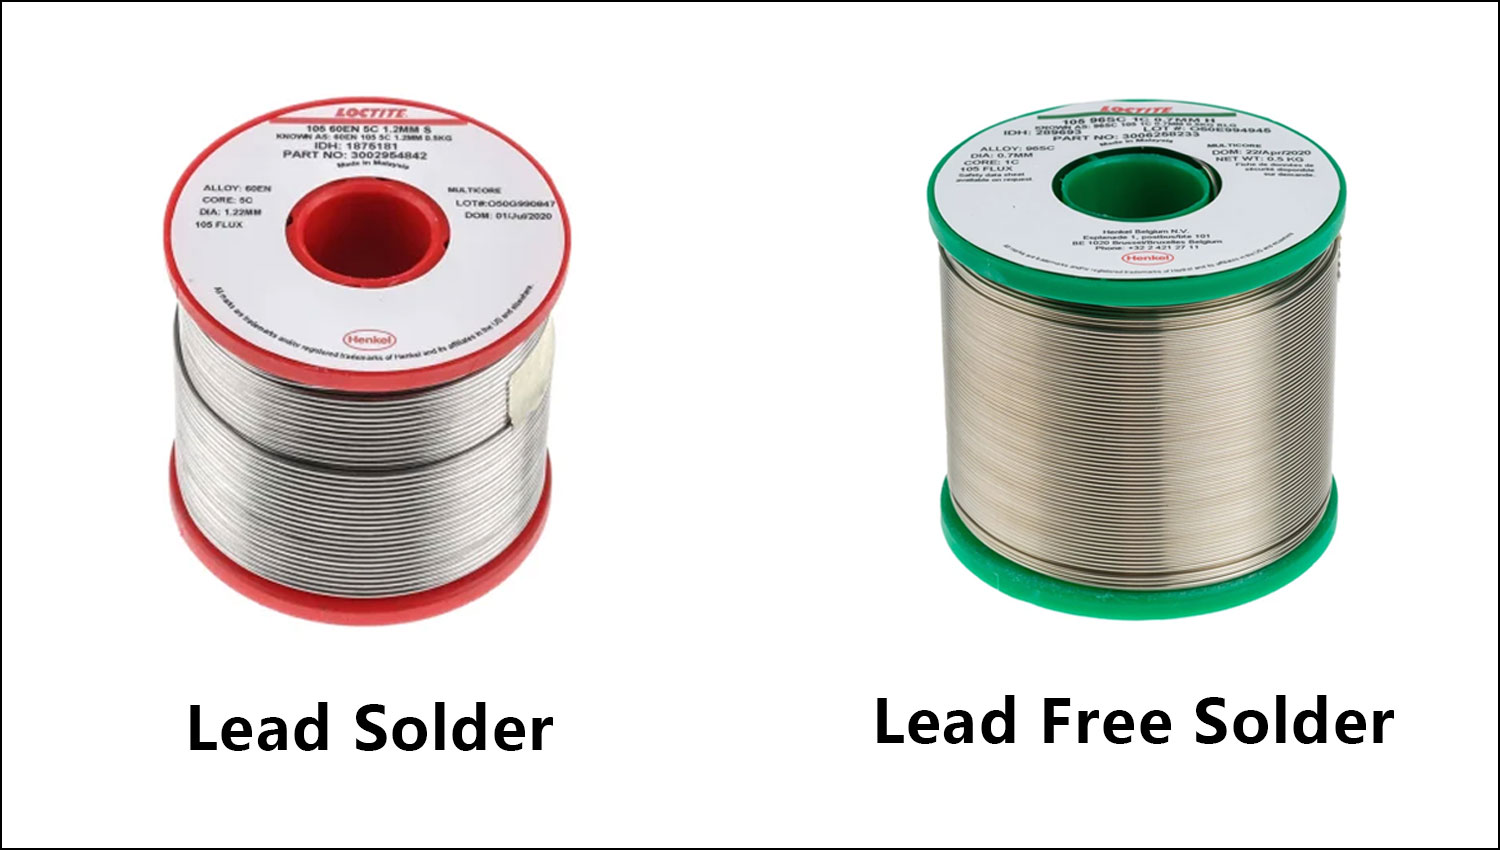 PCB Manufacturing and Lead vs. Lead-Free Solder